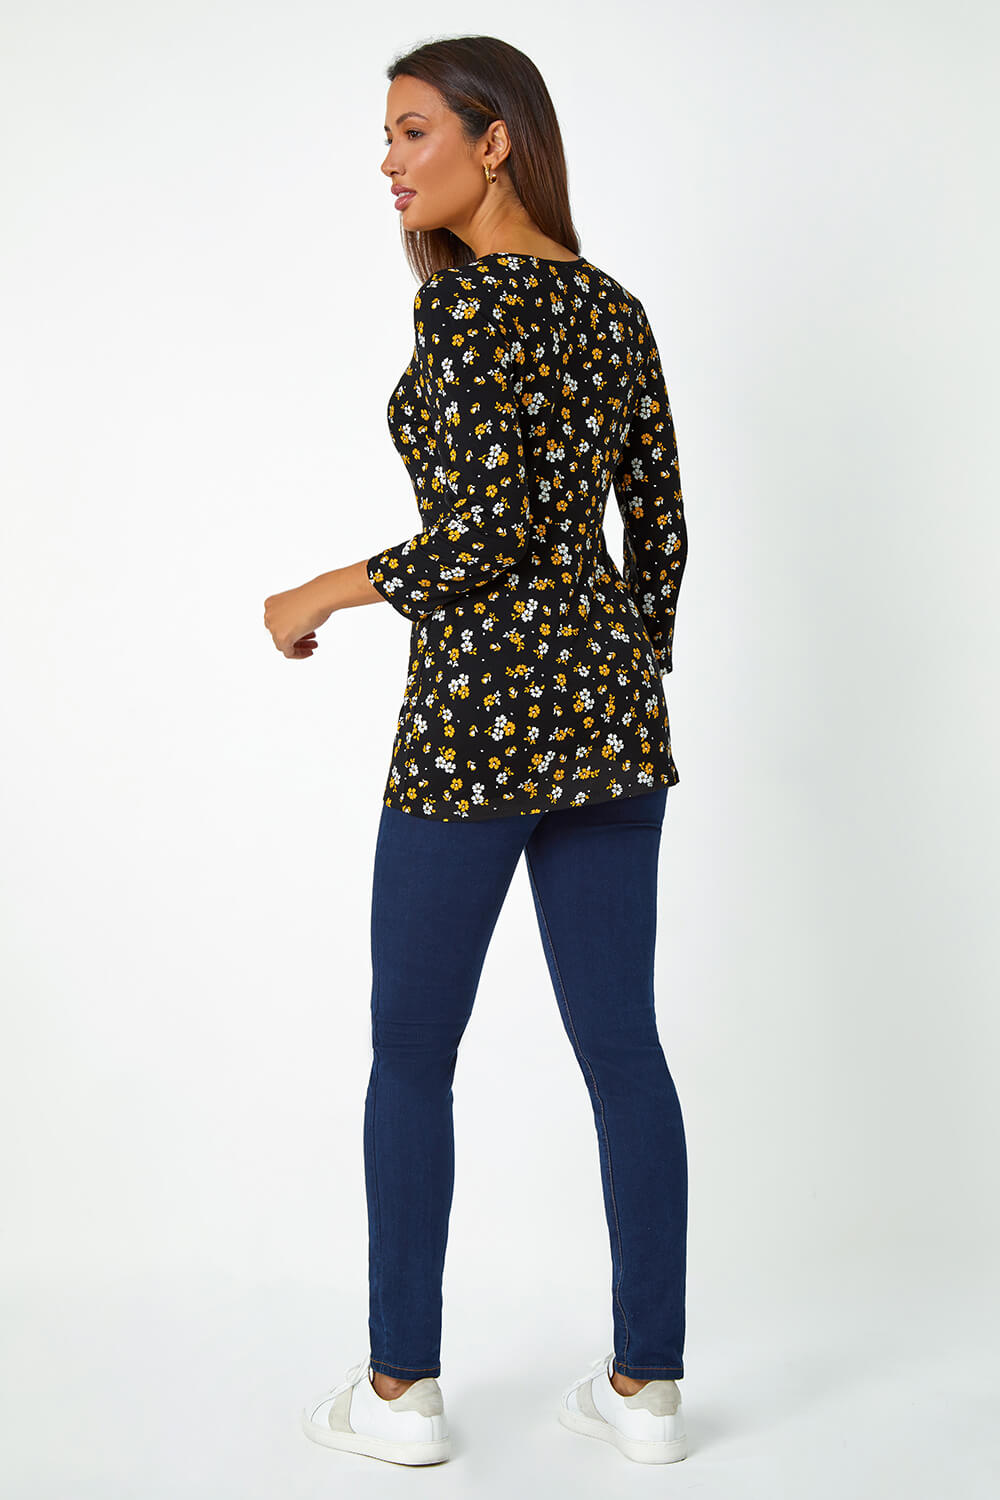 Ochre Floral Print Ruched Stretch Top , Image 3 of 5